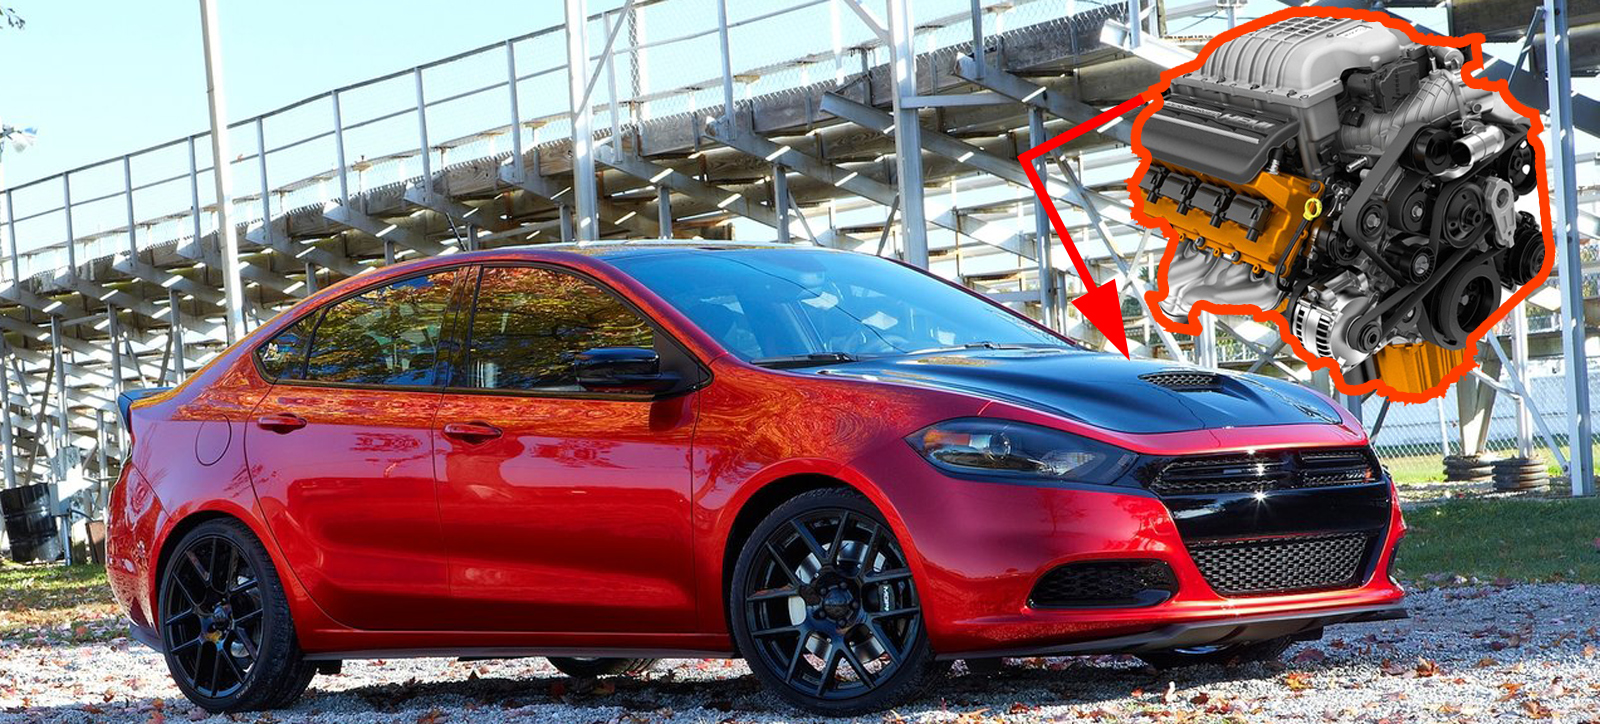 Dodge To Release Dart Hellcat Shifting Lanes